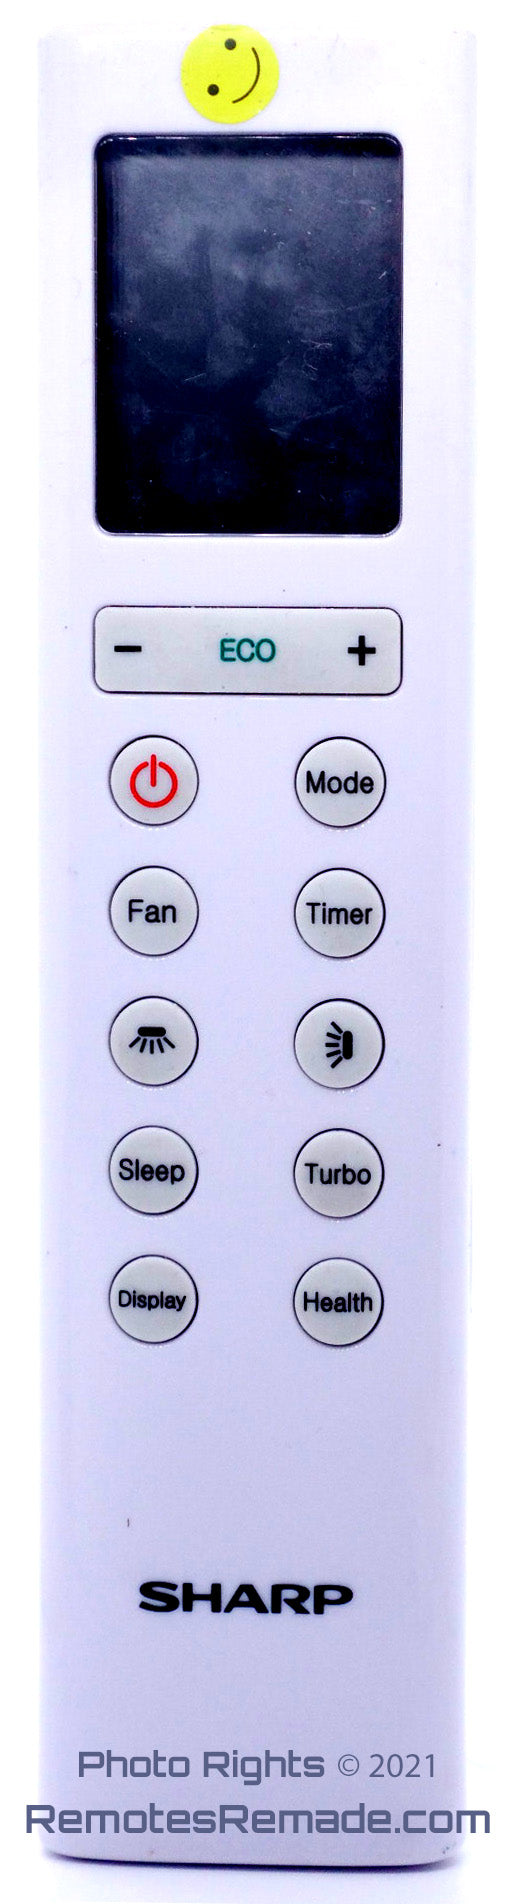 Aircond Remote Control for Sharp A/C's